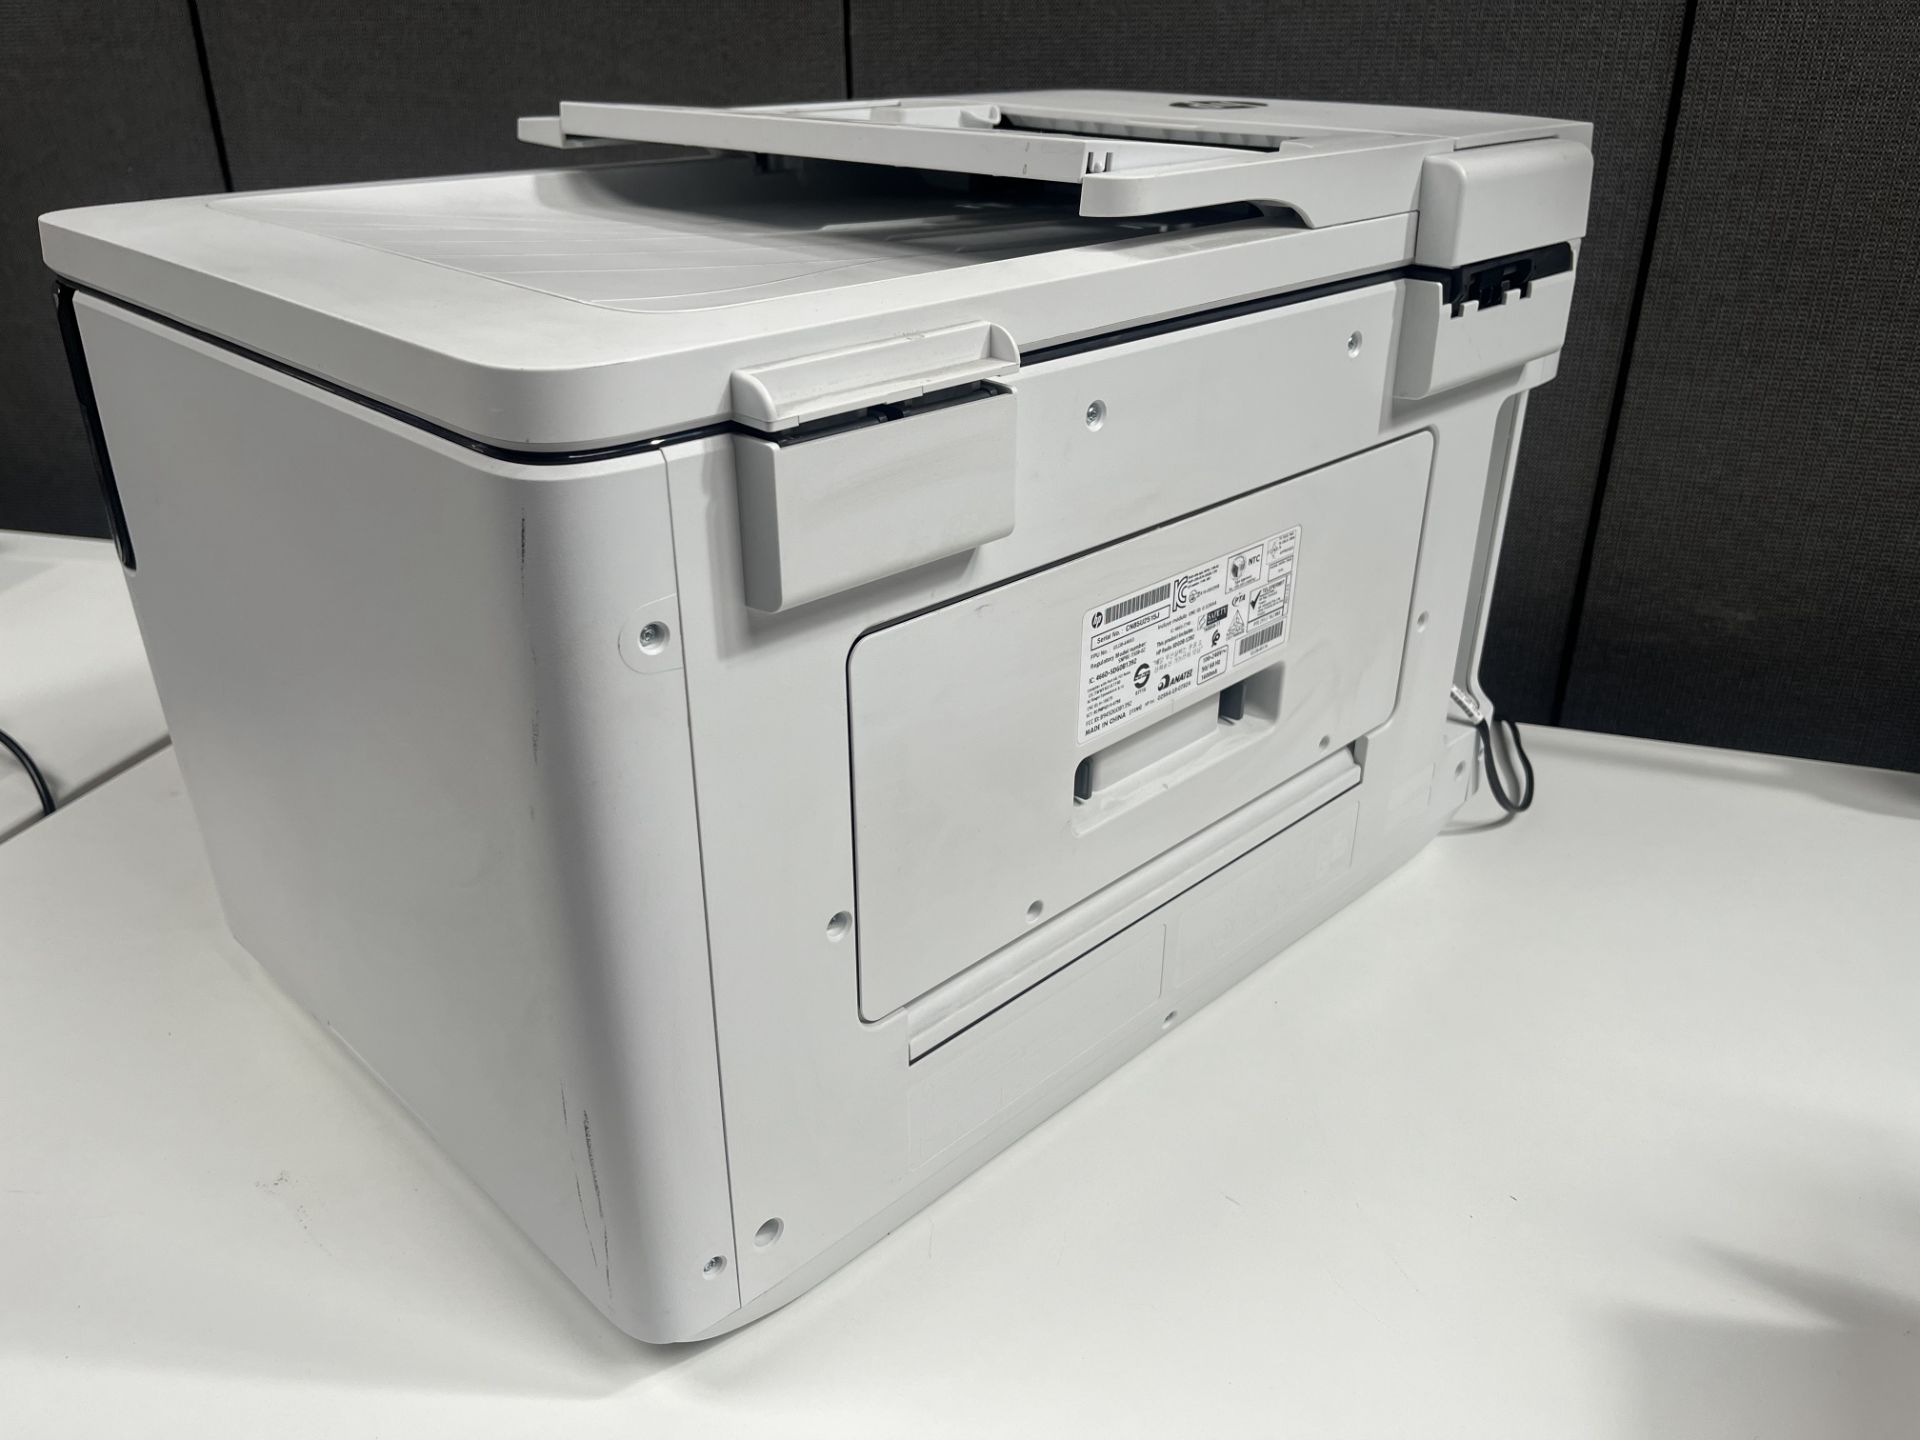 HP OfficeJet Pro 7740, Inkjet Print - Scan - Copy, per customer excellent-fully functional - Image 3 of 5